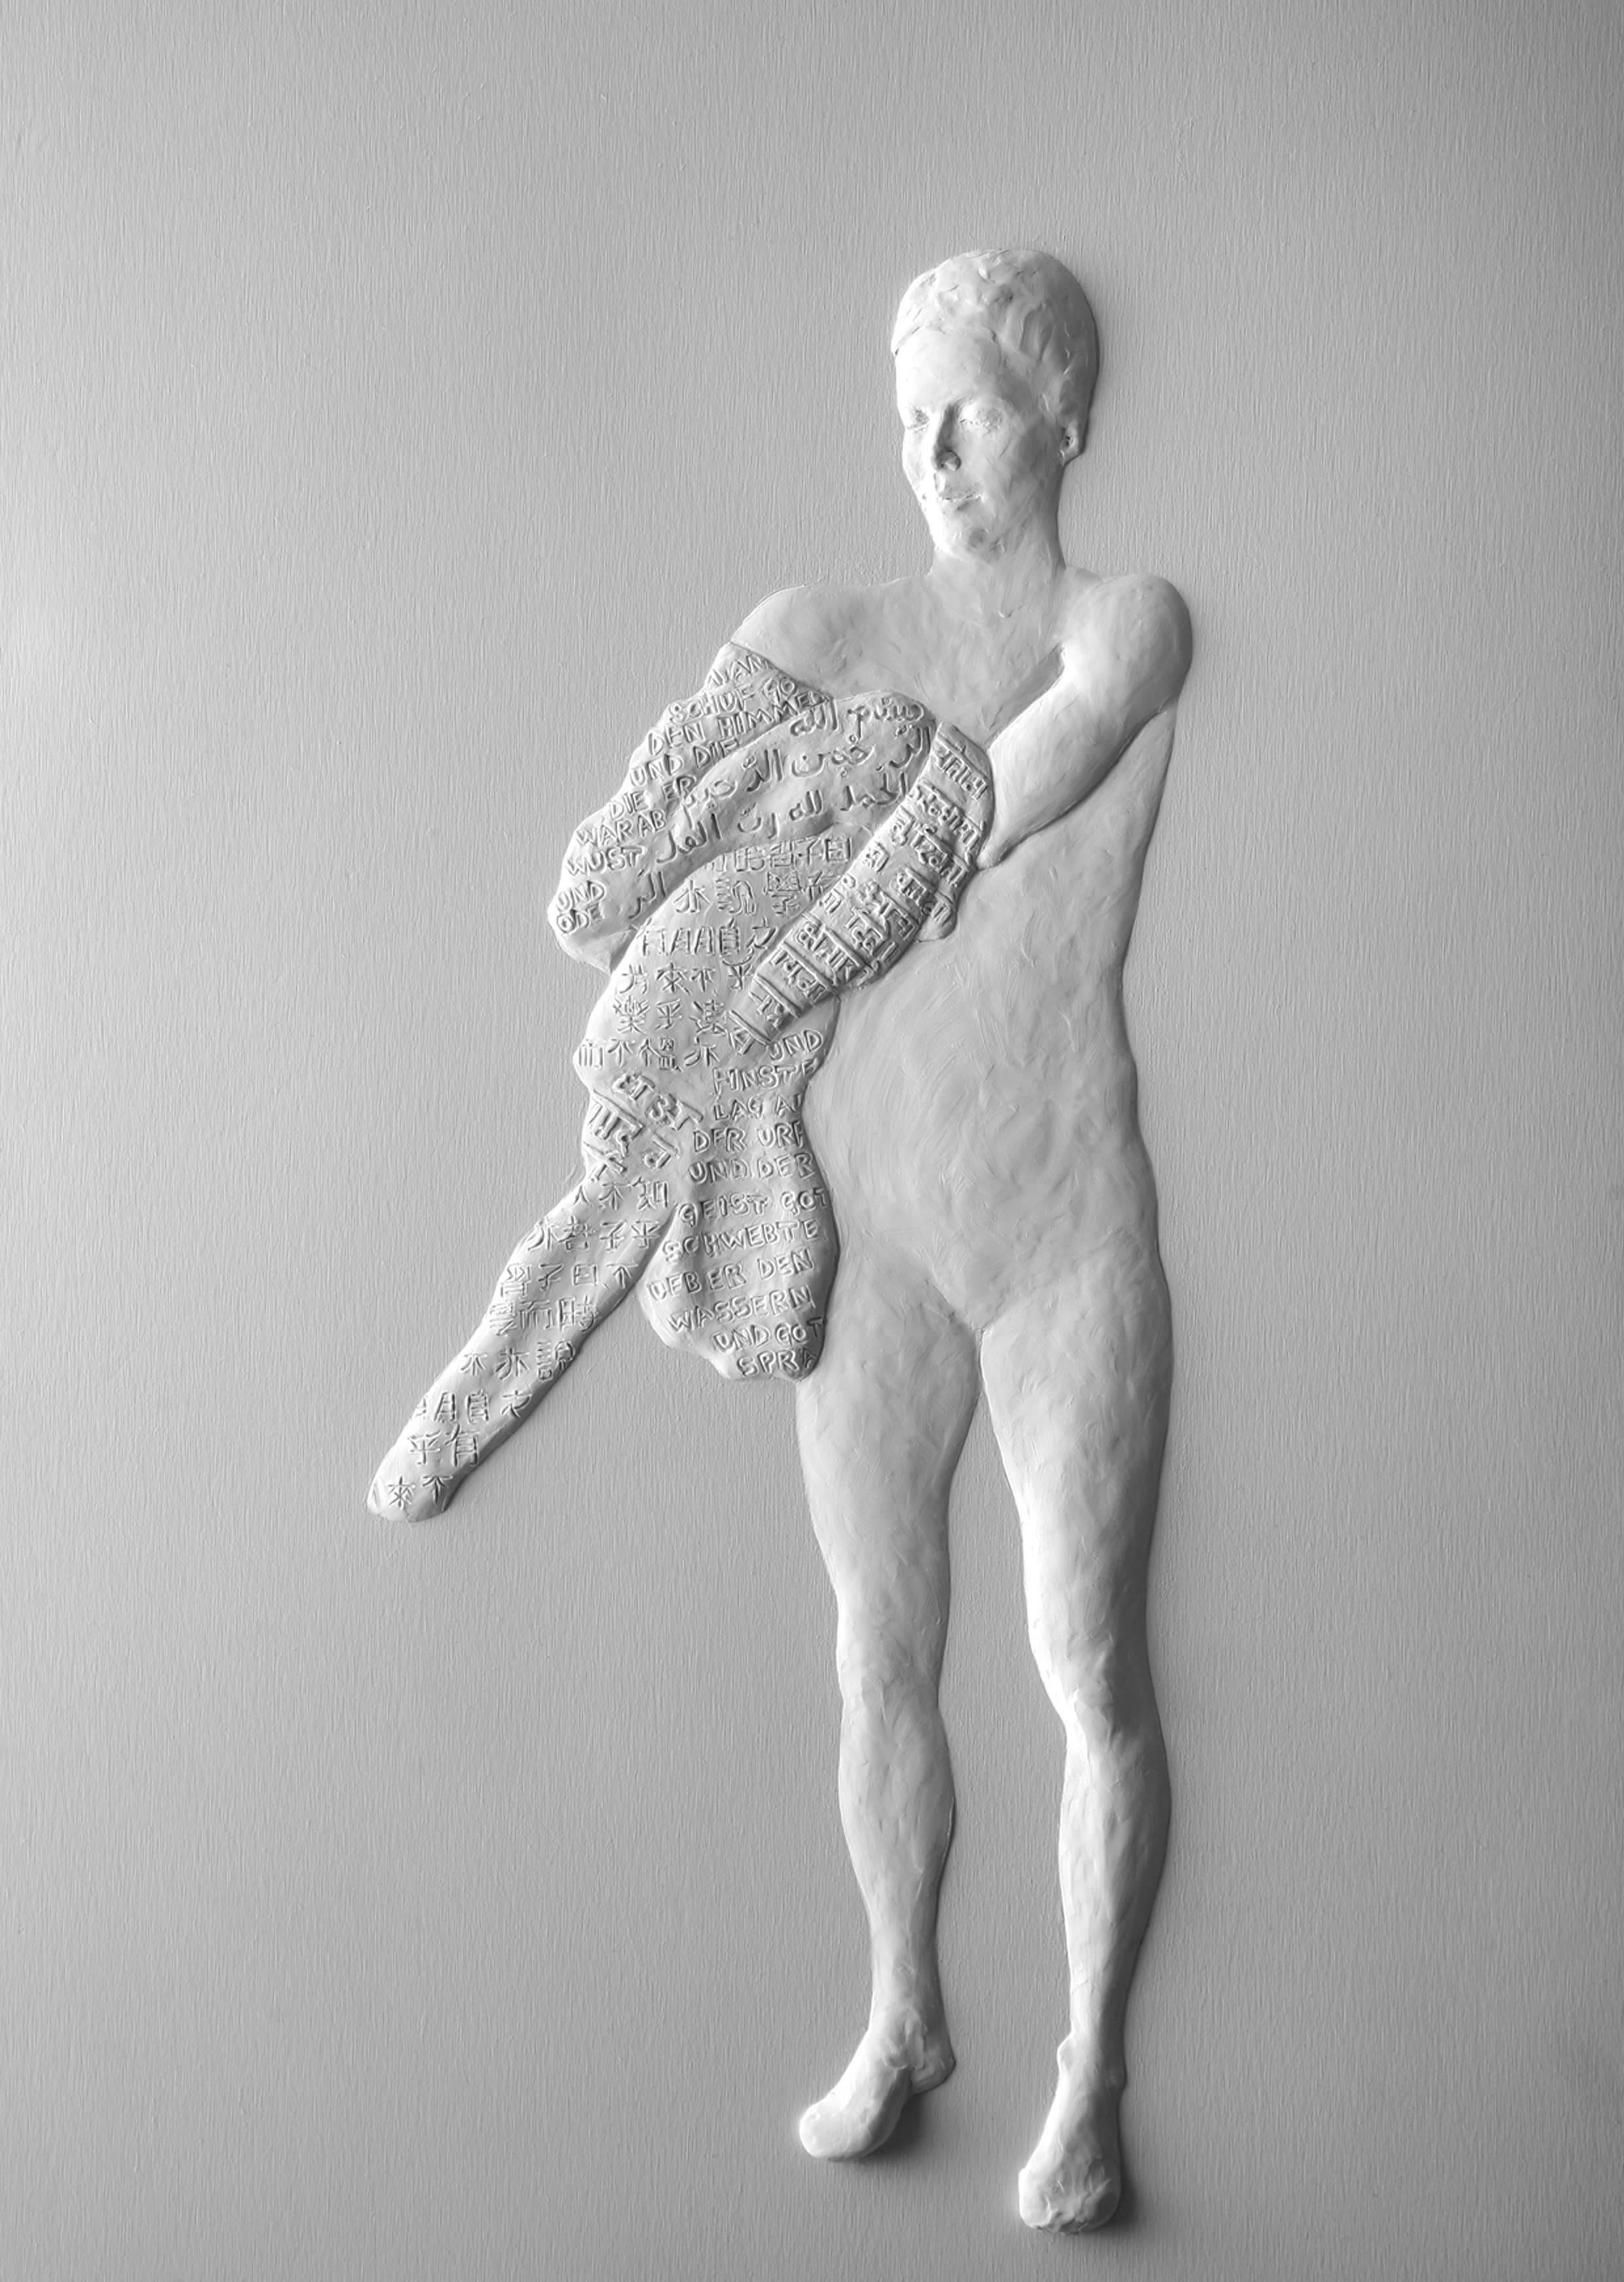 Maja Thommen Figurative Sculpture - "Dogma" Bas Relief Panel from the "Dressing" Series, 2011